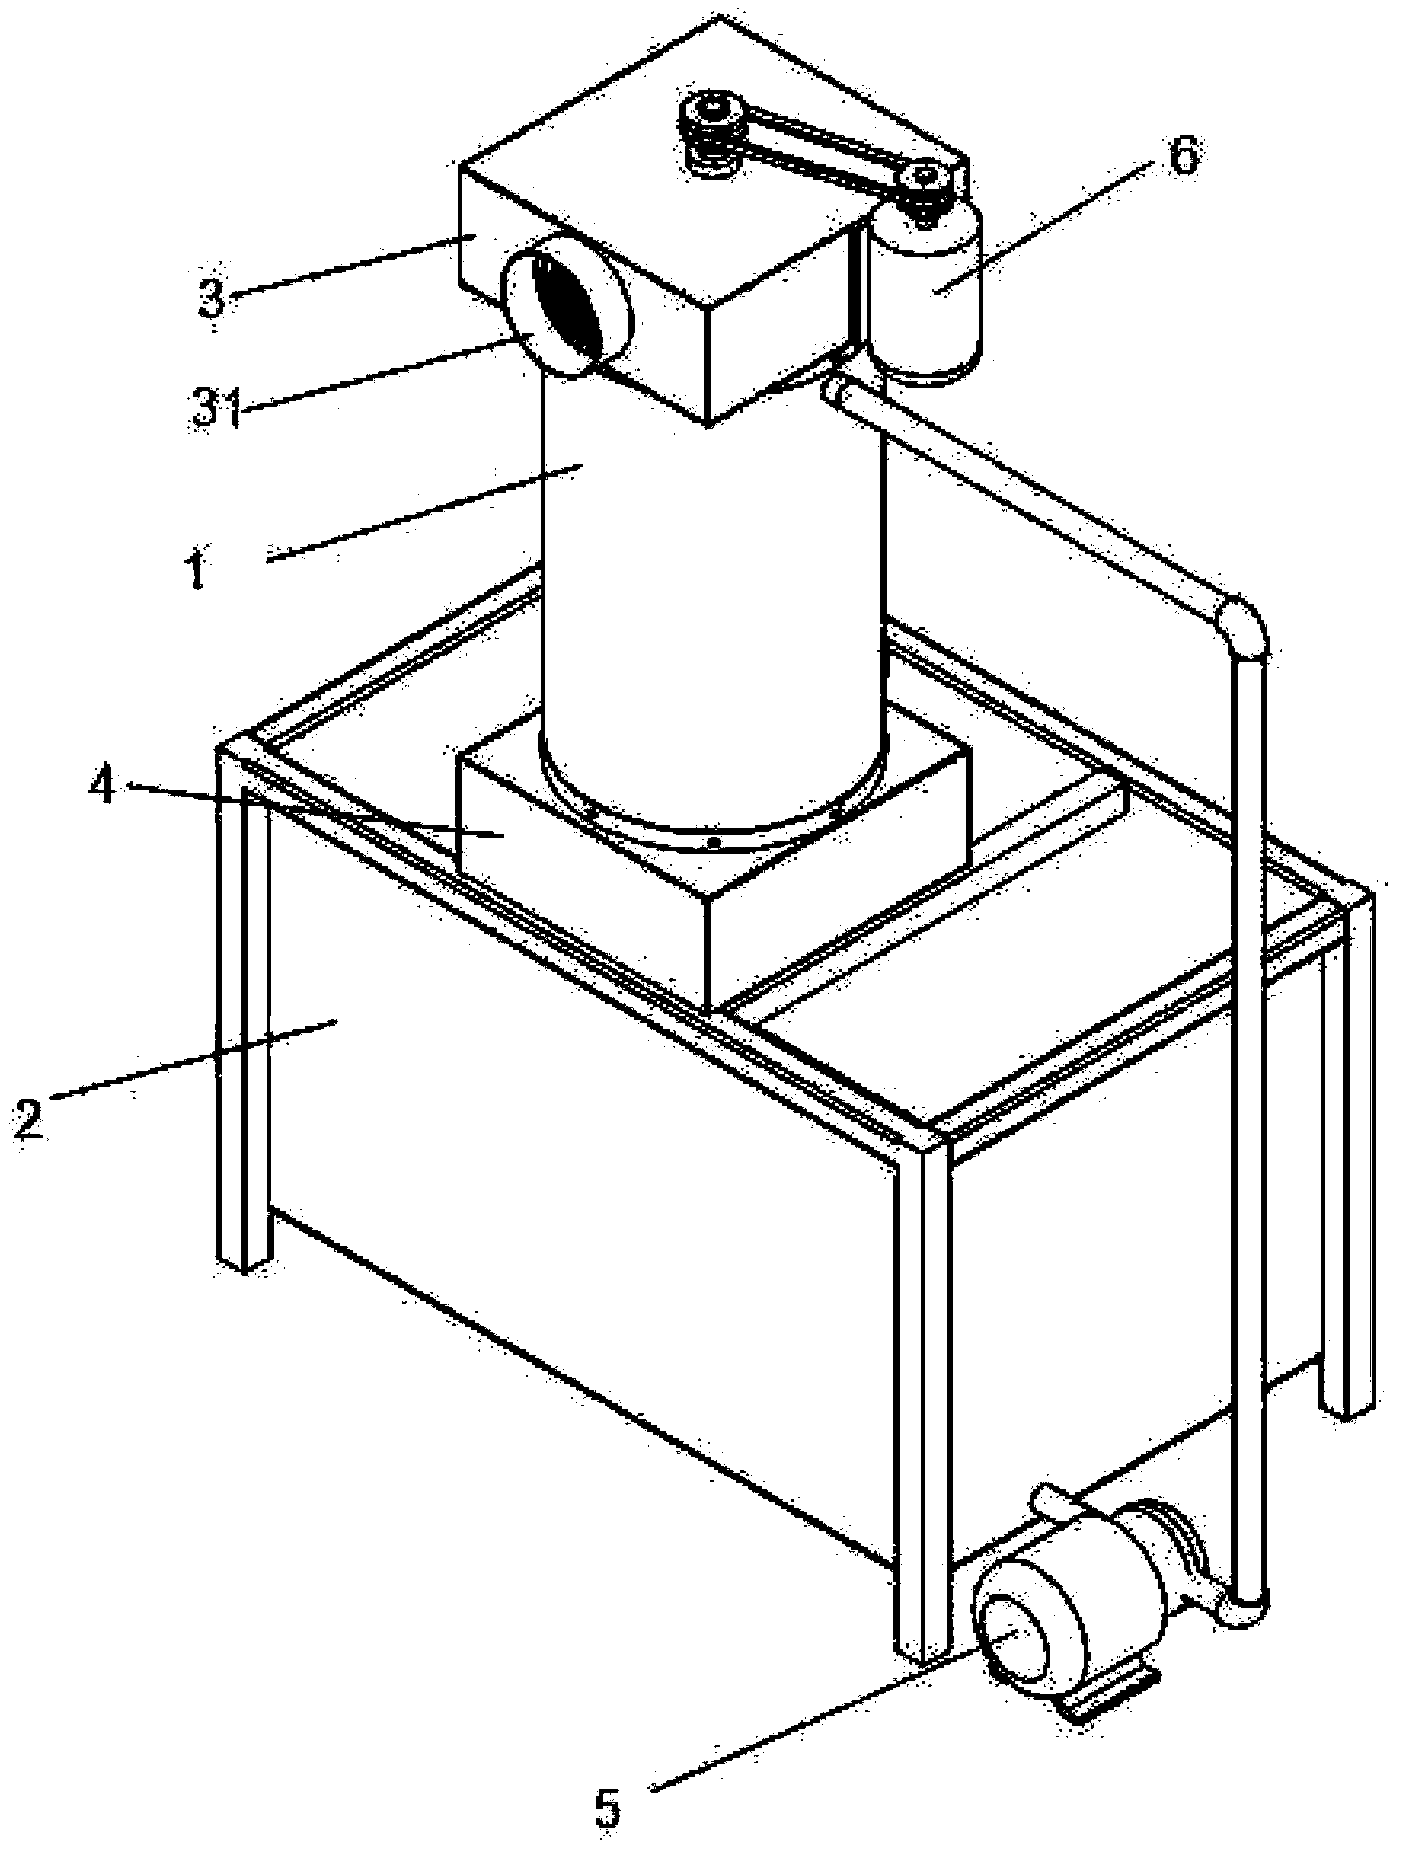 Gas-liquid mixing device and method